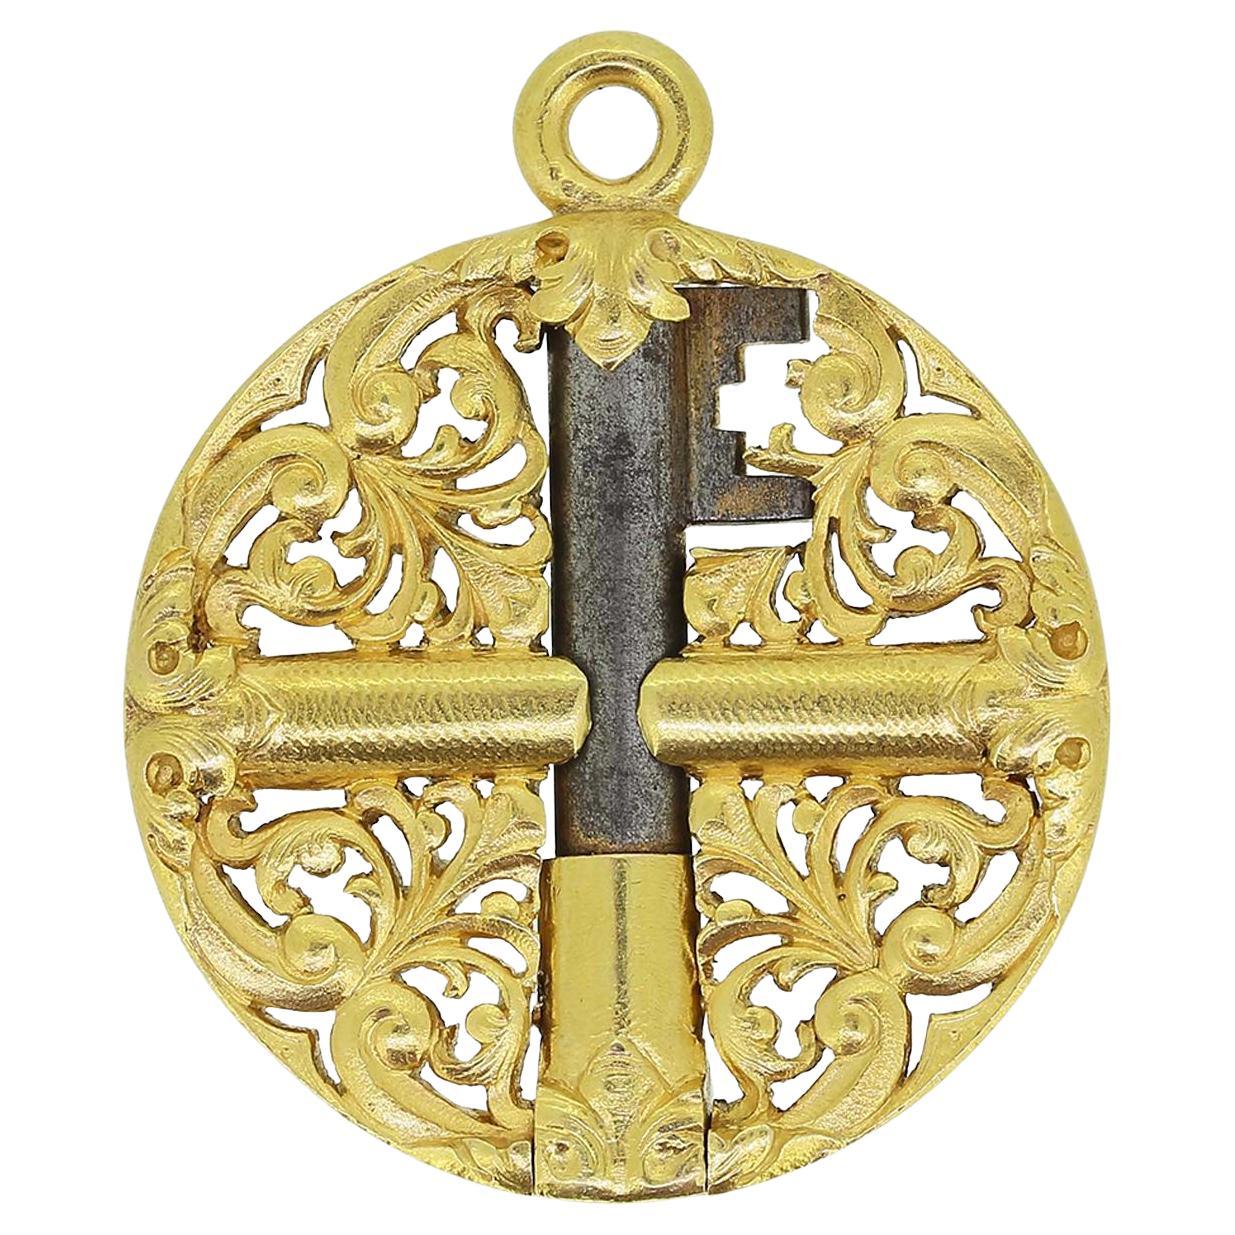 Wièse Watch Key Pendant For Sale